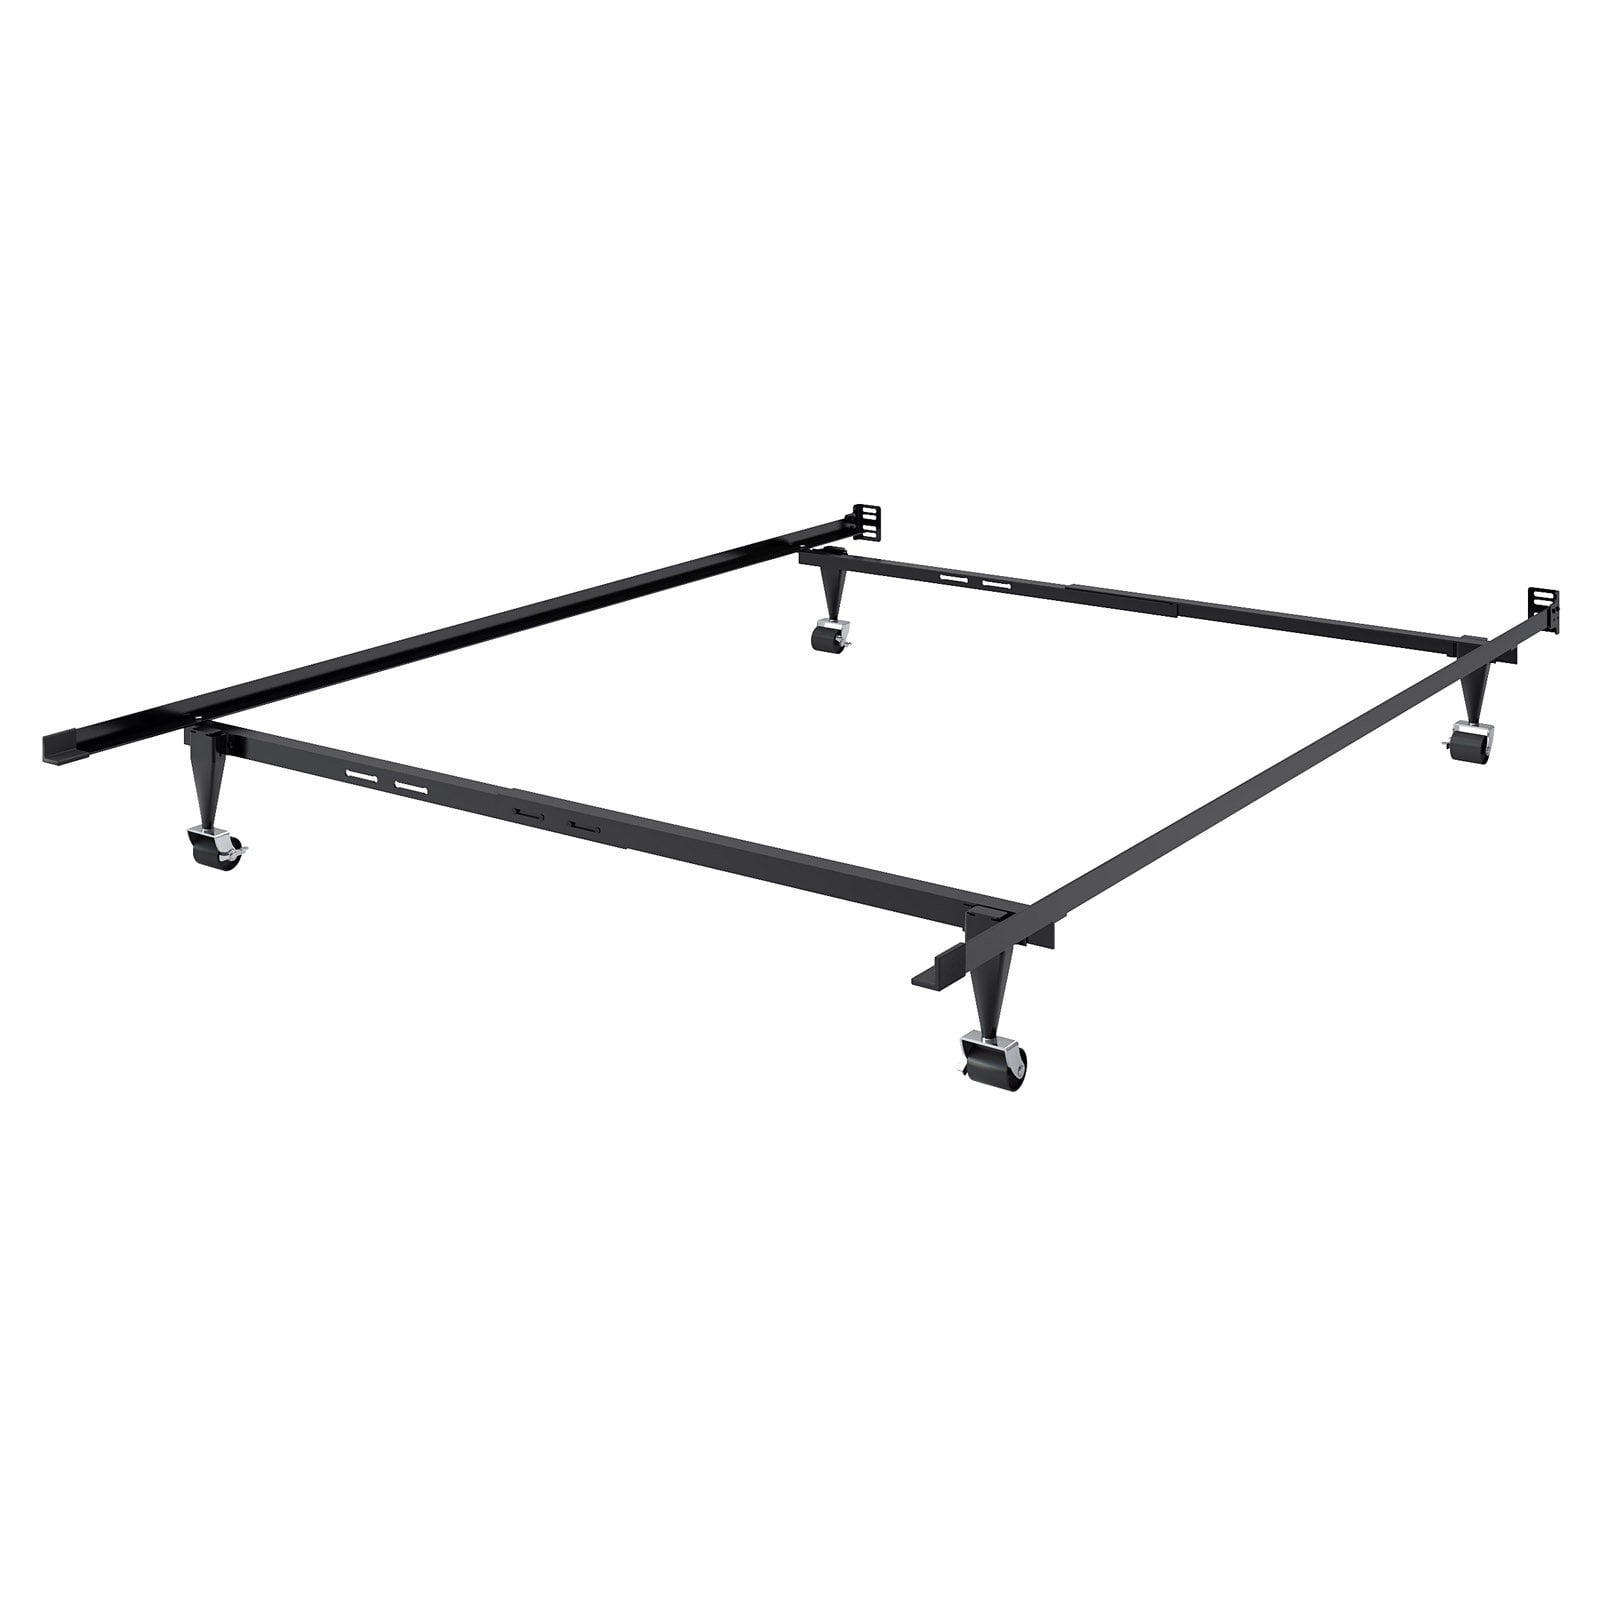 Full Double Metal Bed Frame, Mainstays 12 Adjustable Metal Bed Frame White Twin King